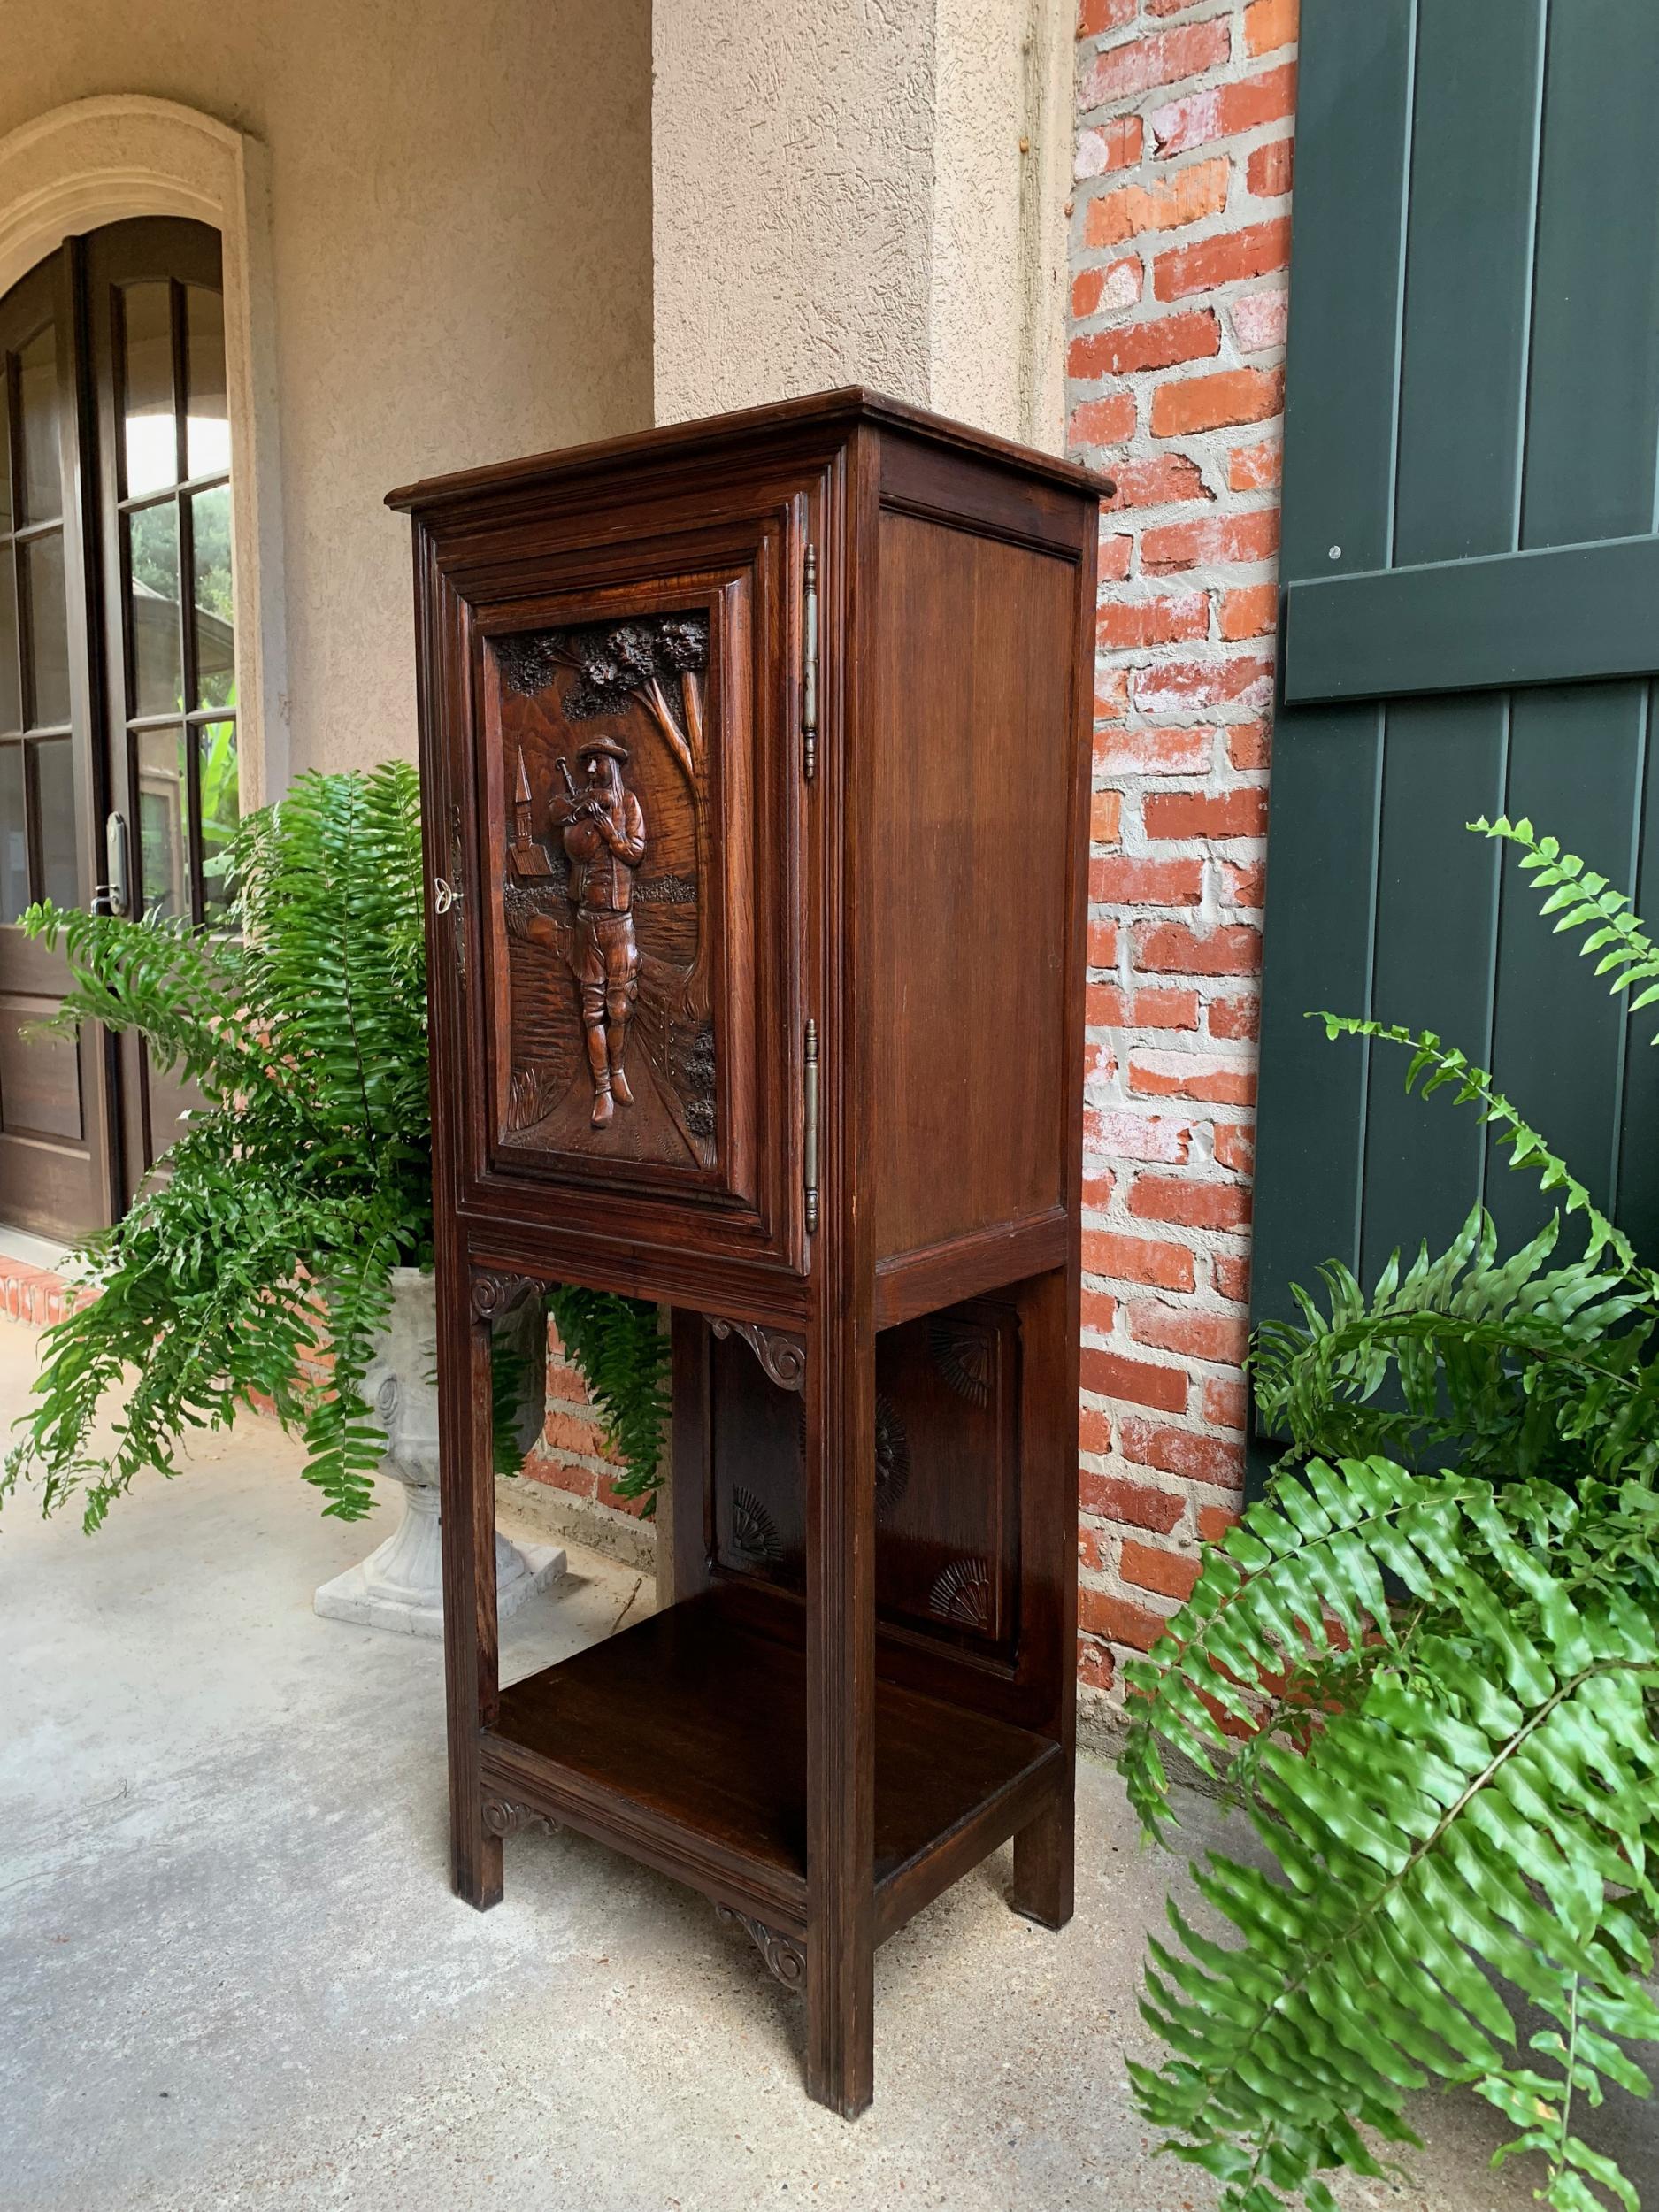 Antique French carved oak cabinet Breton bagpipe Brittany petite bookcase.

~Direct from France~
~Tall and slender antique French cabinet, with very unique Breton carvings!~
~The most outstanding feature is the large, dimensionally carved door panel